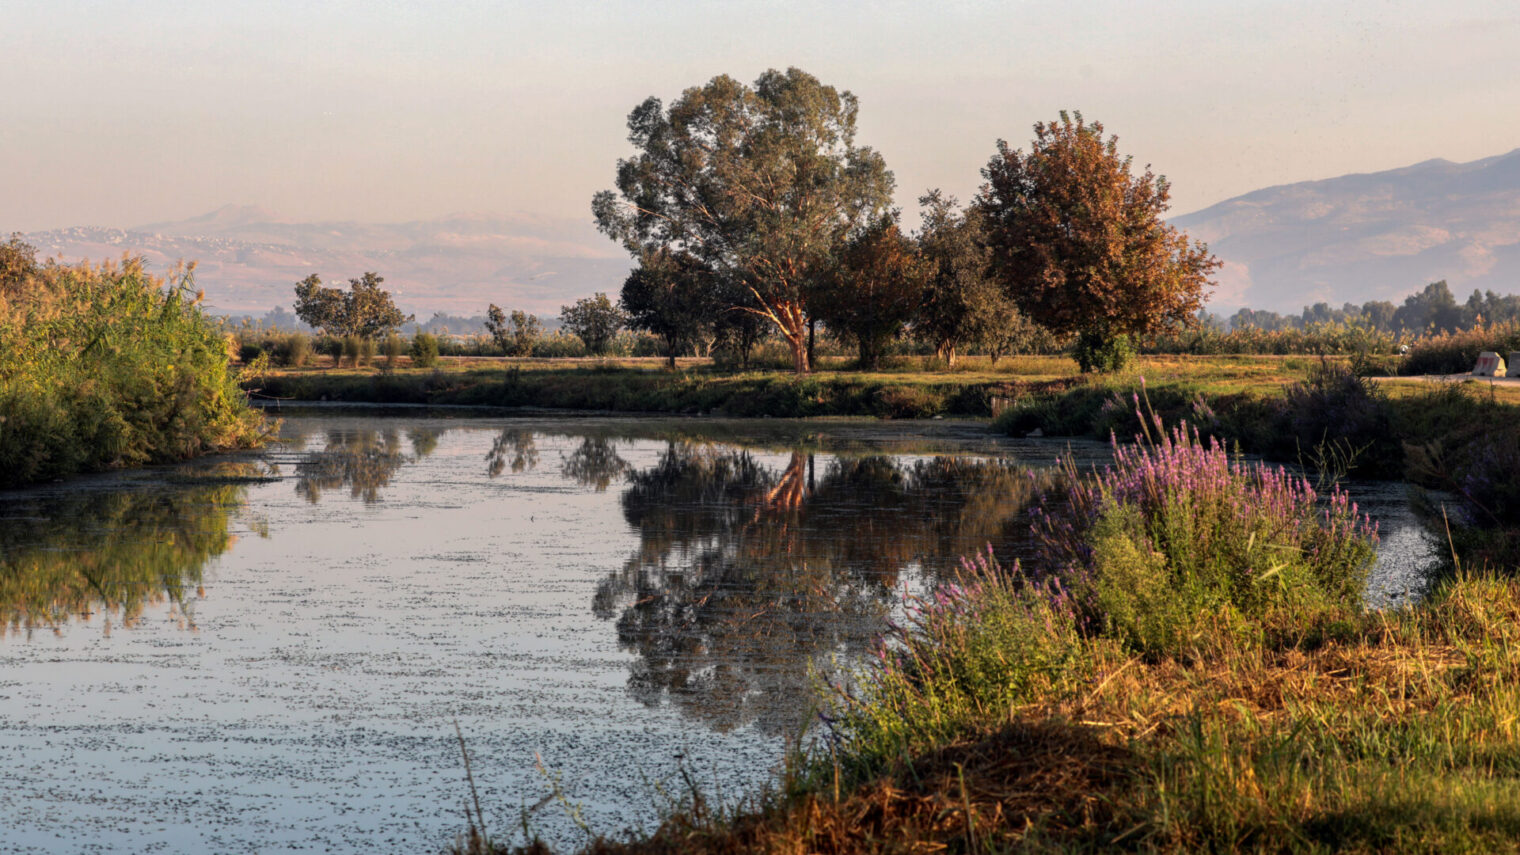 A view of the Hula lake in northern Israel. Photo by Yossi Zamir/Flash90